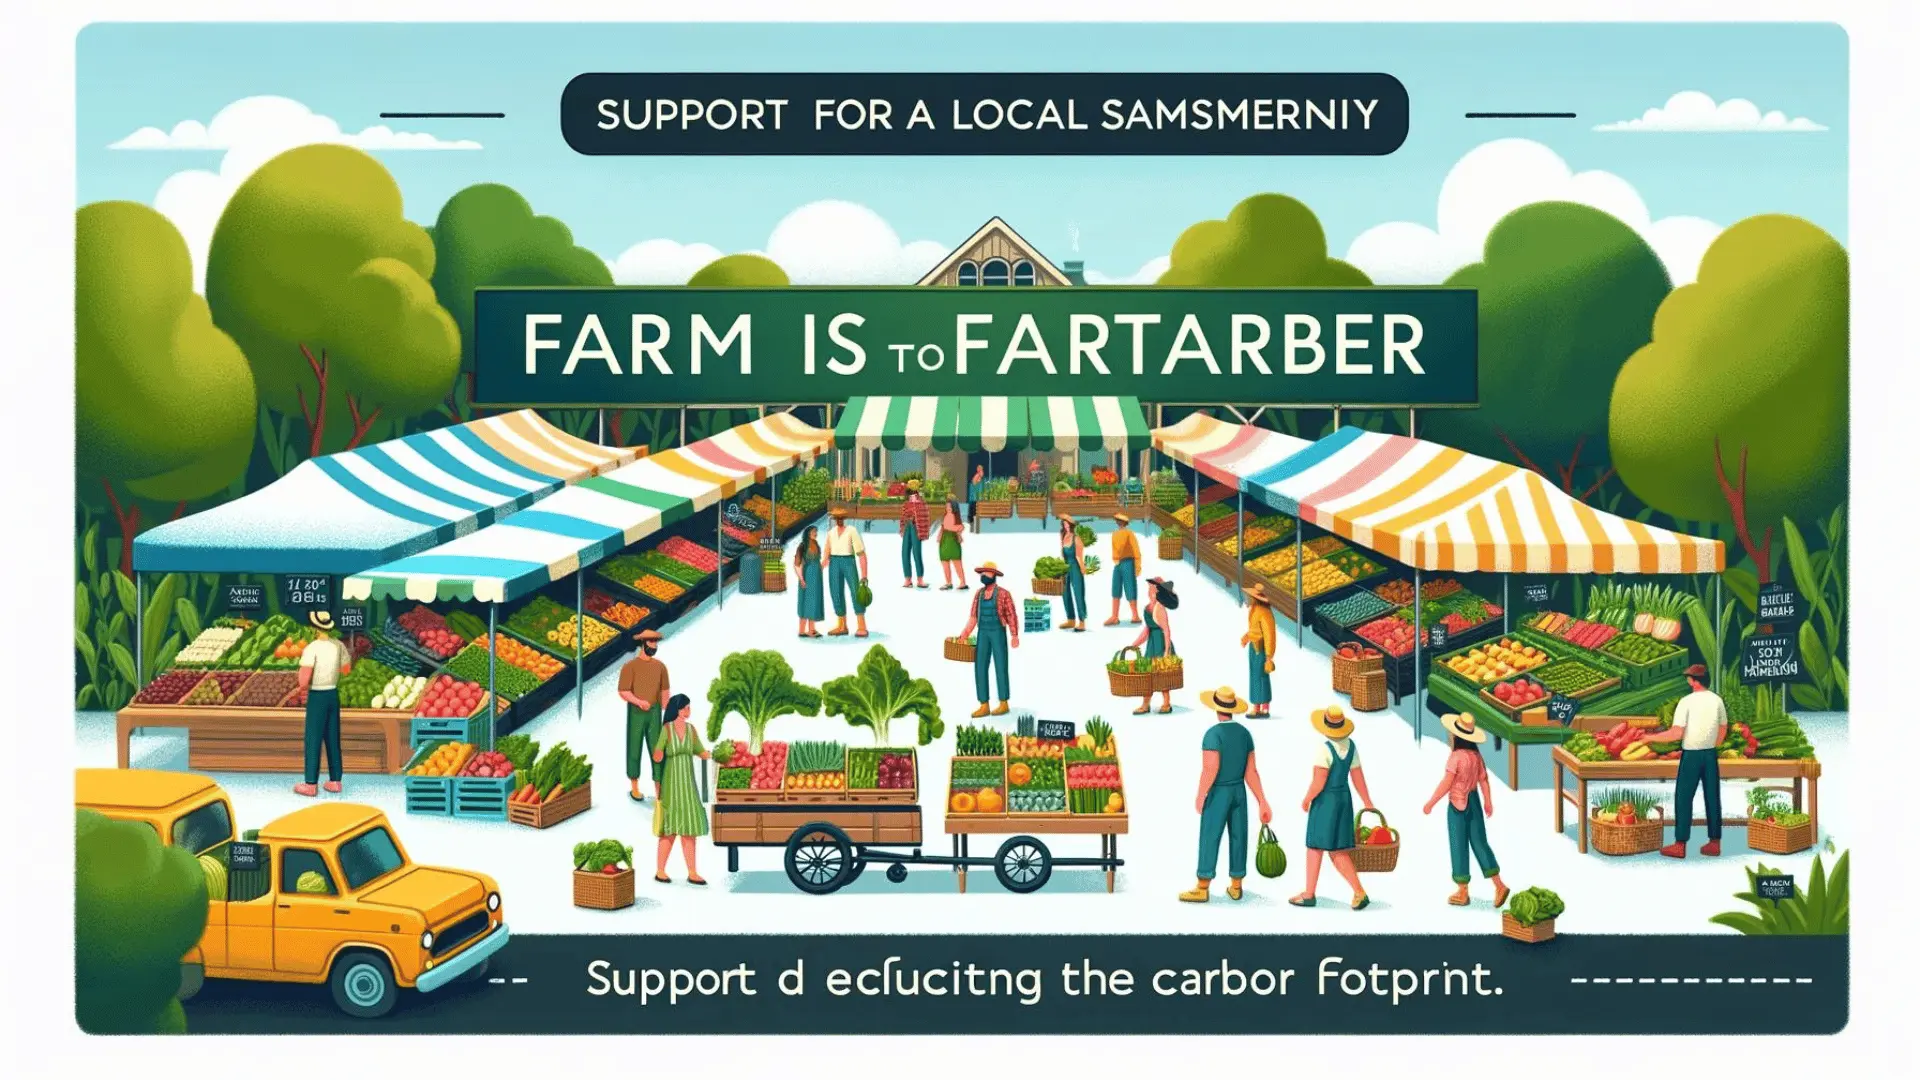 Community members supporting local farmers and reducing carbon emissions by buying local.